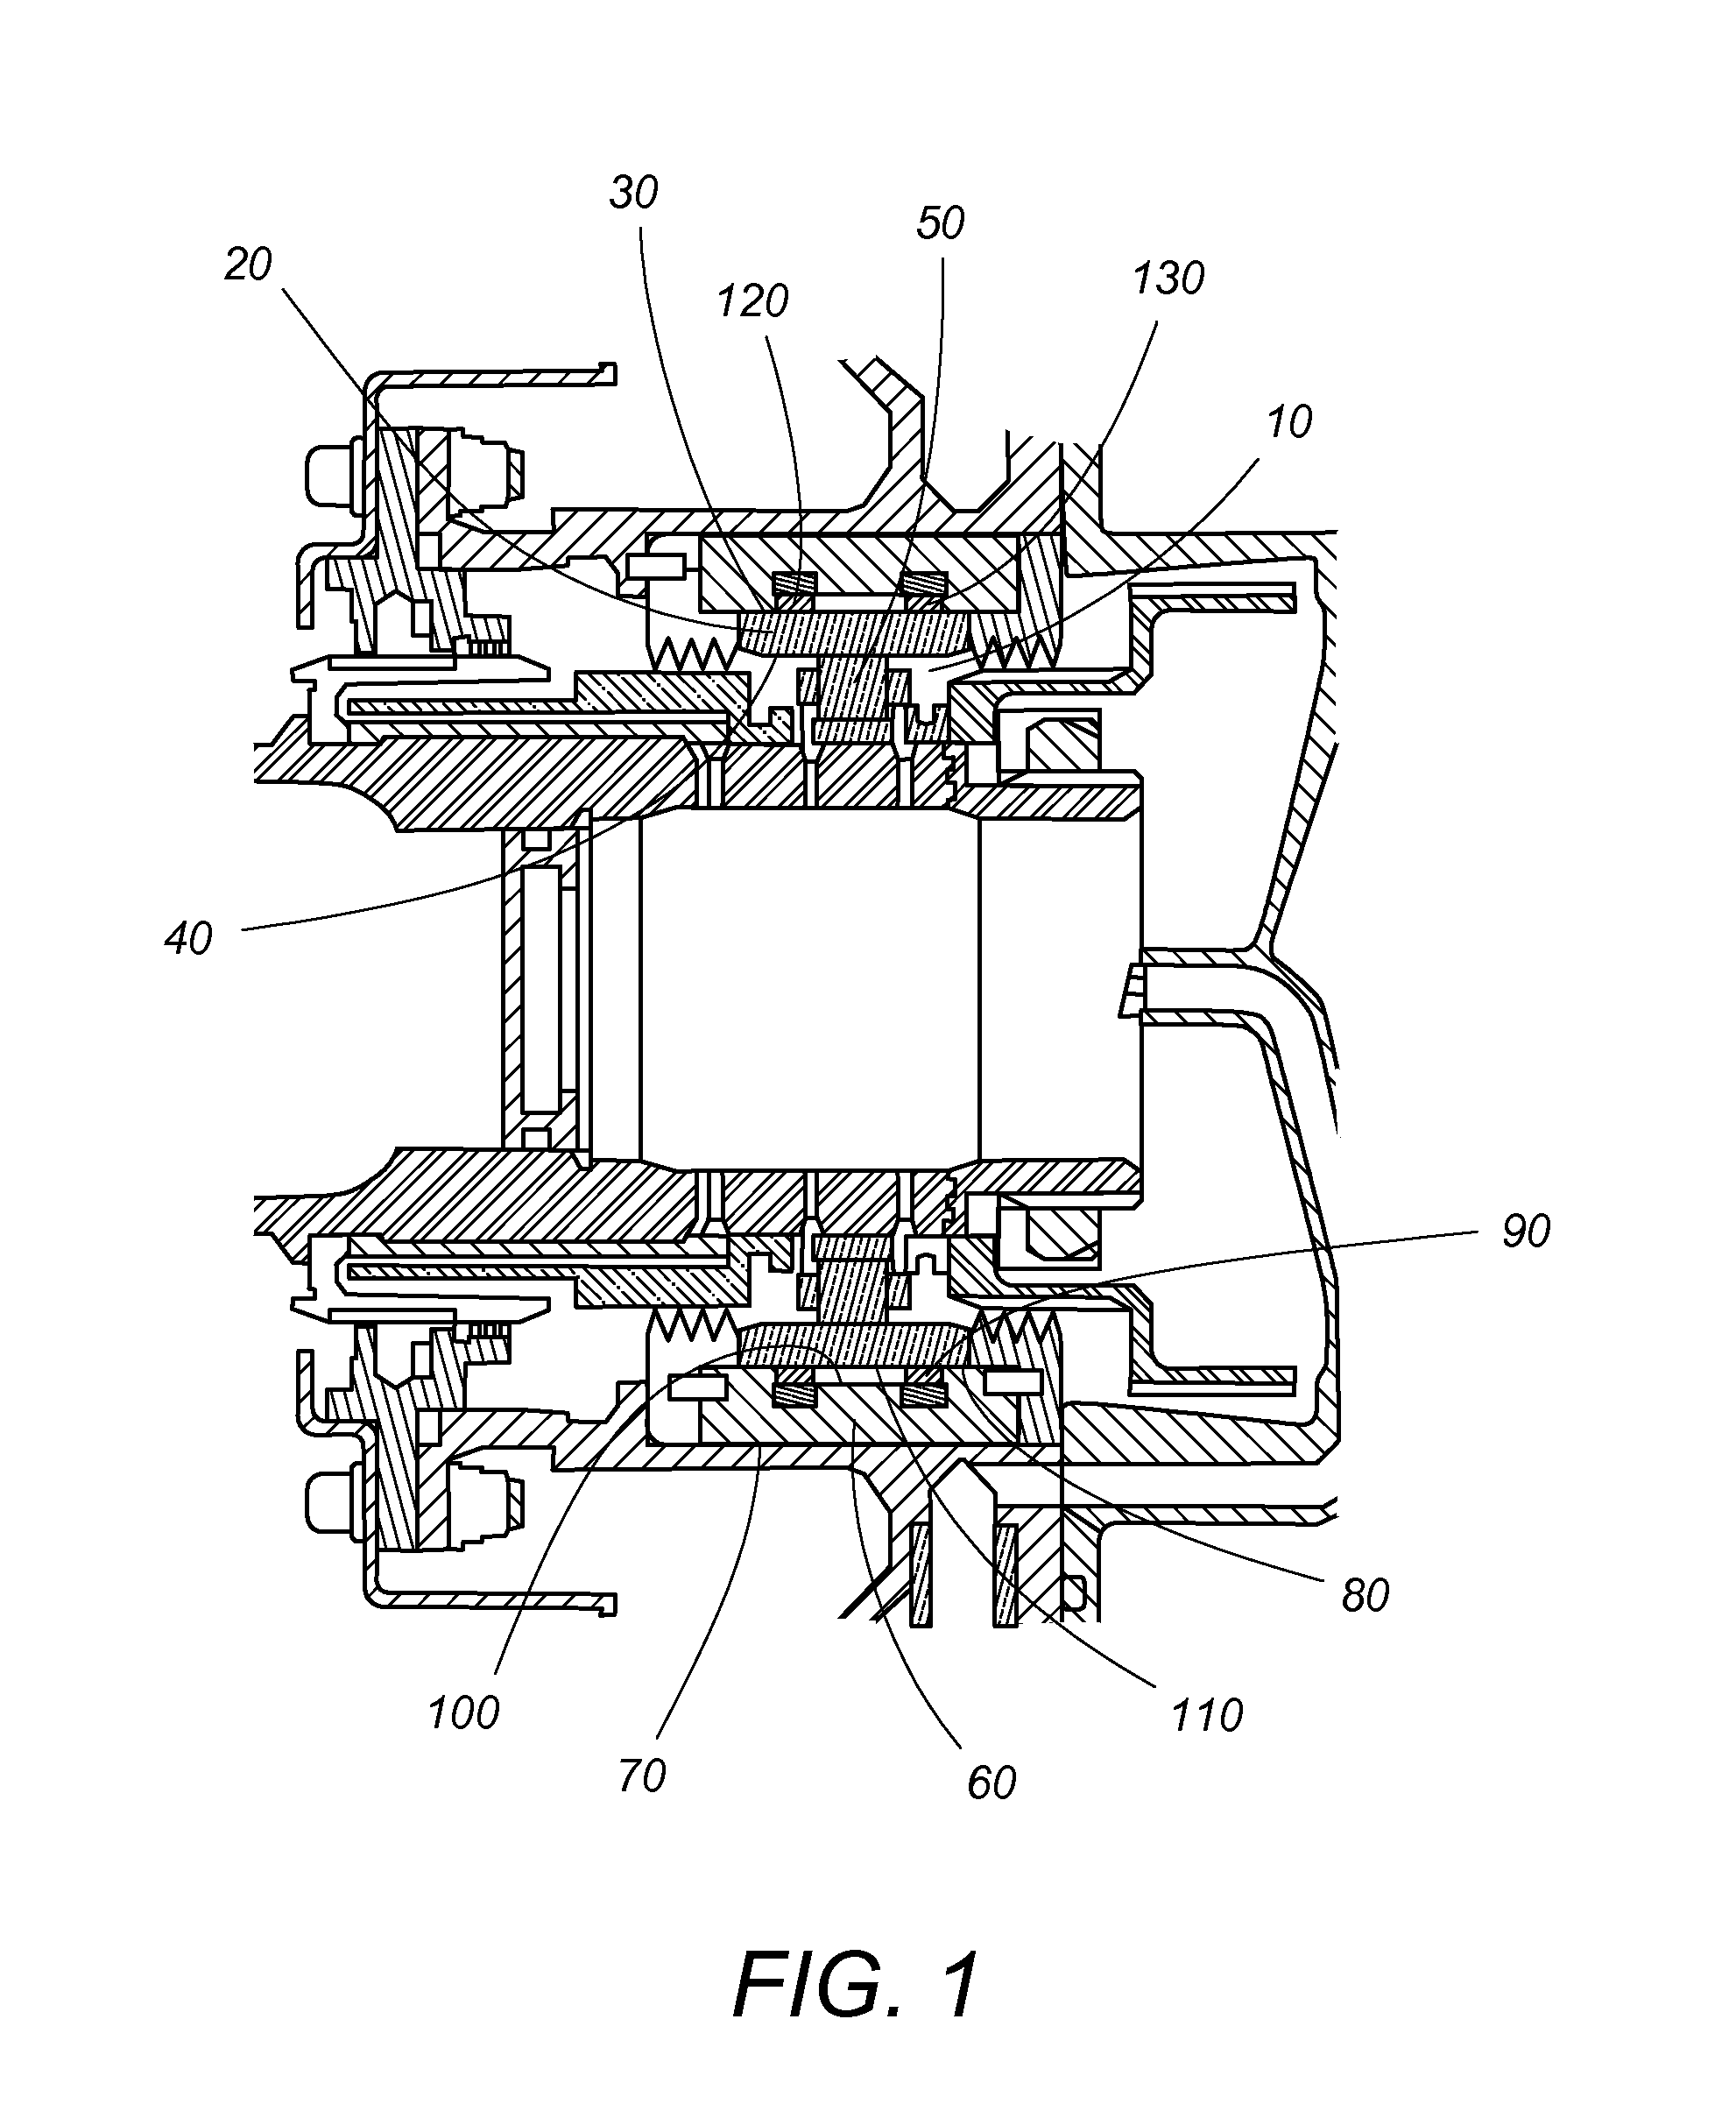 Magnetic squeeze film damper system for a gas turbine engine